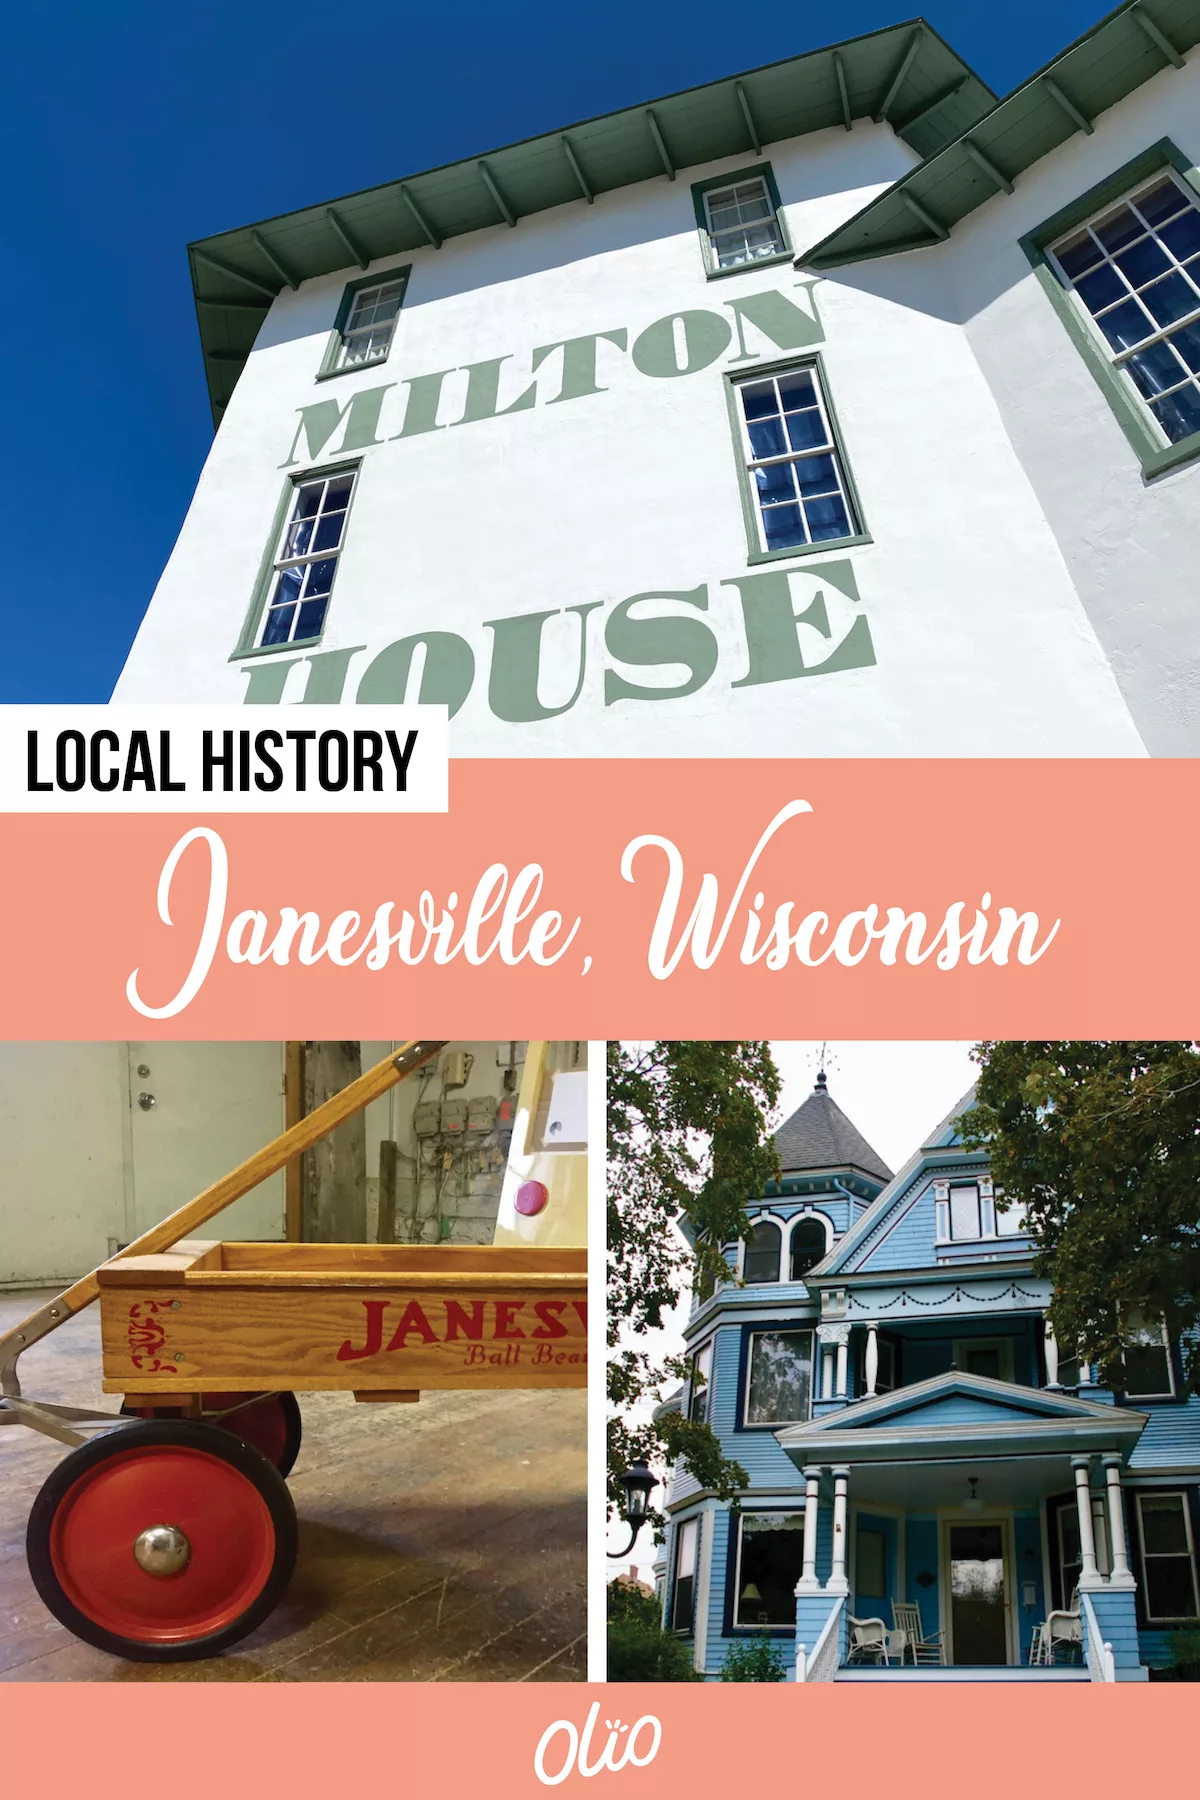 Do you love local history? Discover three ways to experience the unique history of Janesville, Wisconsin the next time you're in the area. #Wisconsin #Janesville #history